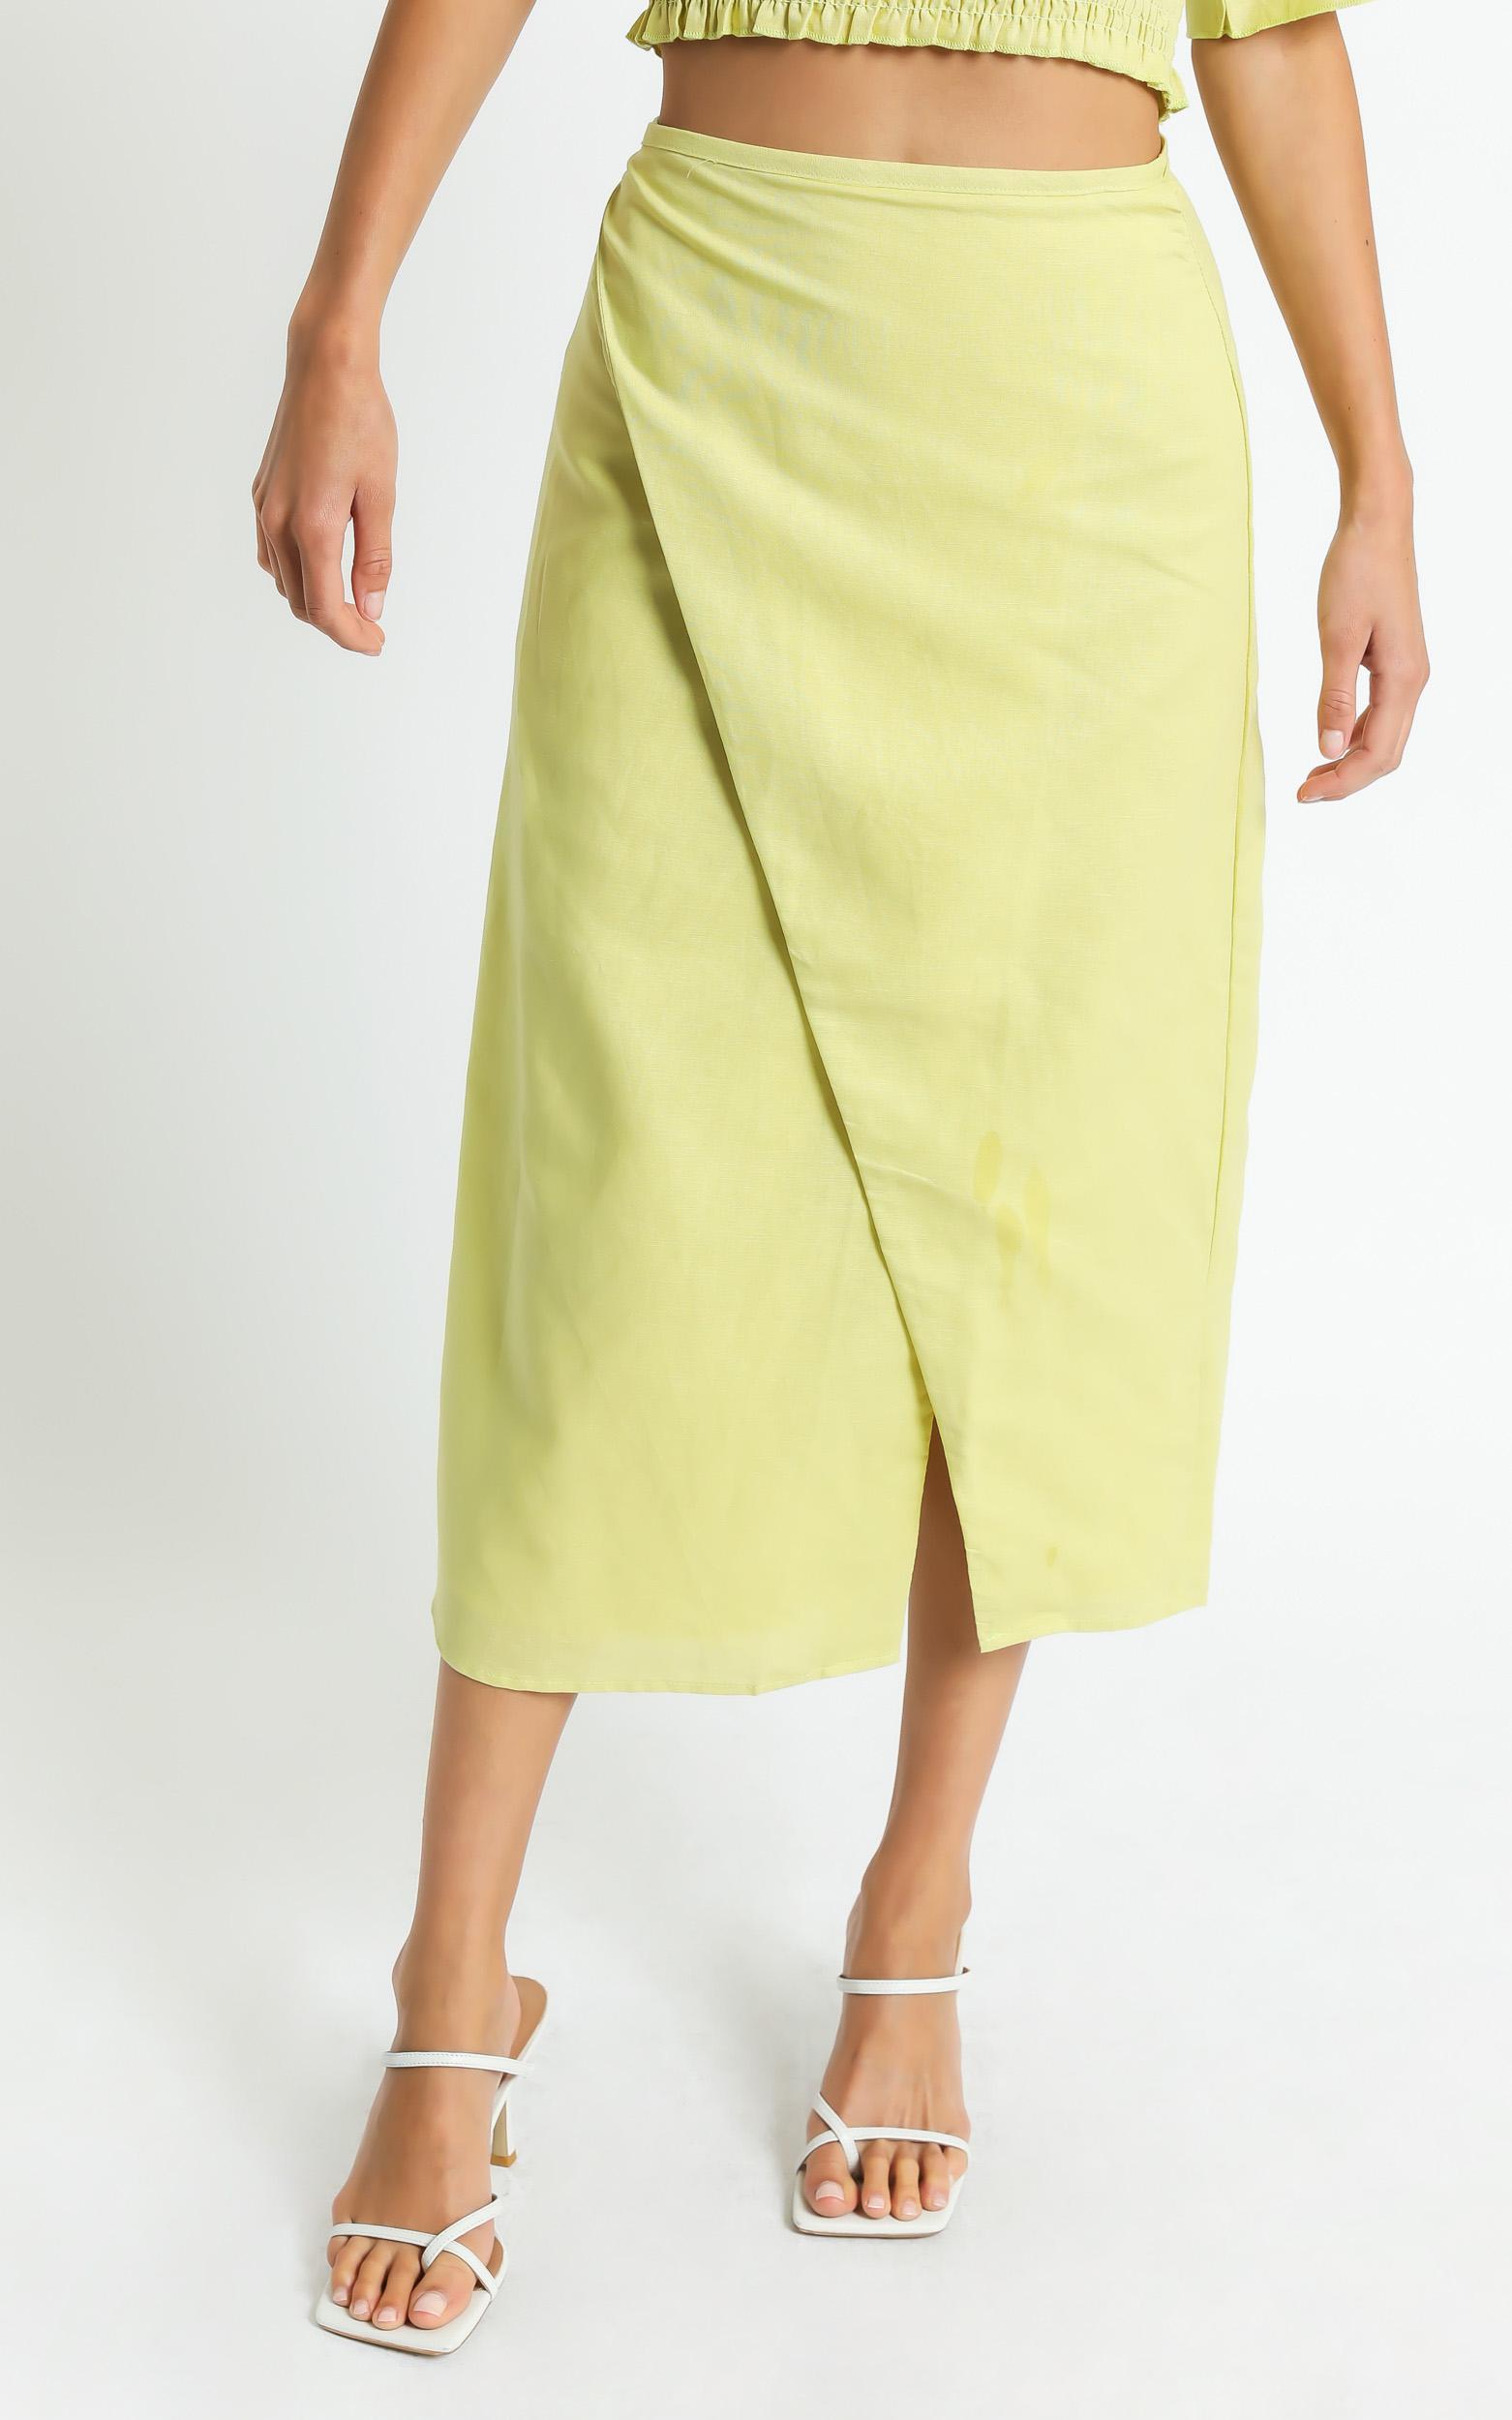 Charlie Holiday - Mila Wrap Skirt in Chartreuse | Showpo USA